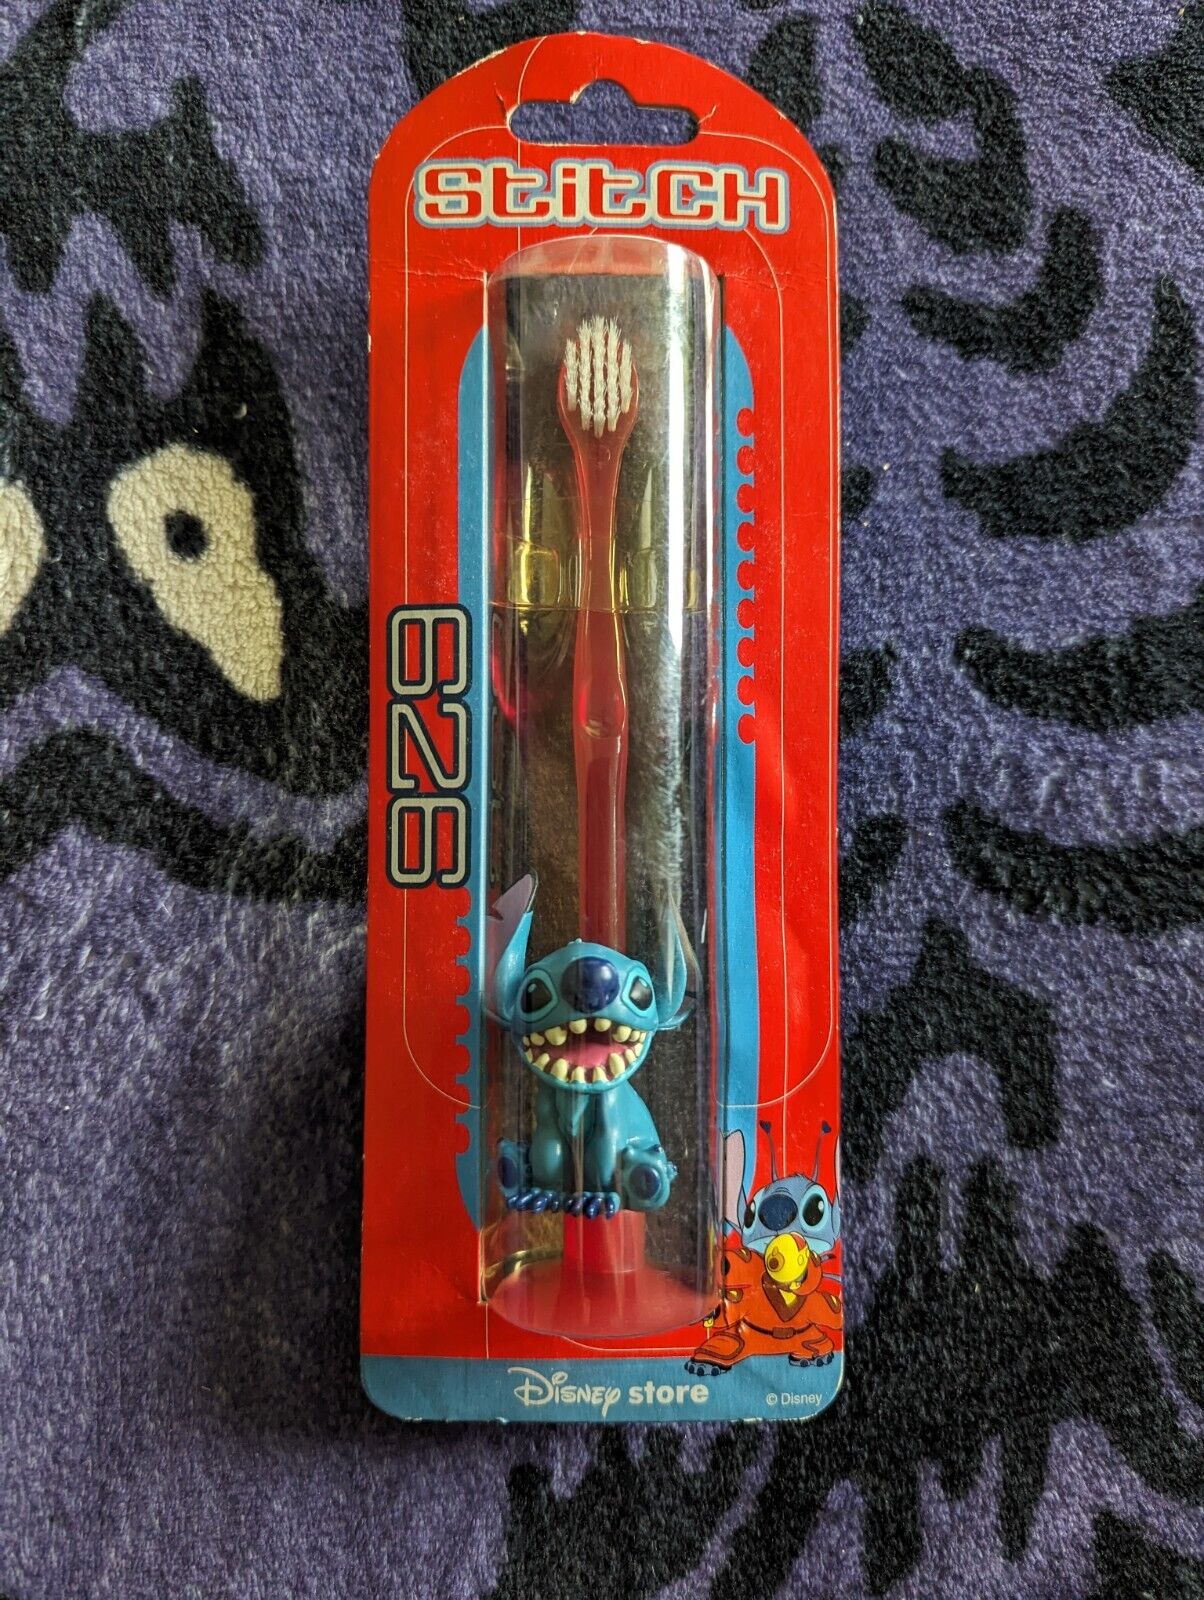 Vintage Disney Store Lilo And Stitch Toothbrush Sealed New Red. Disneyana. RARE